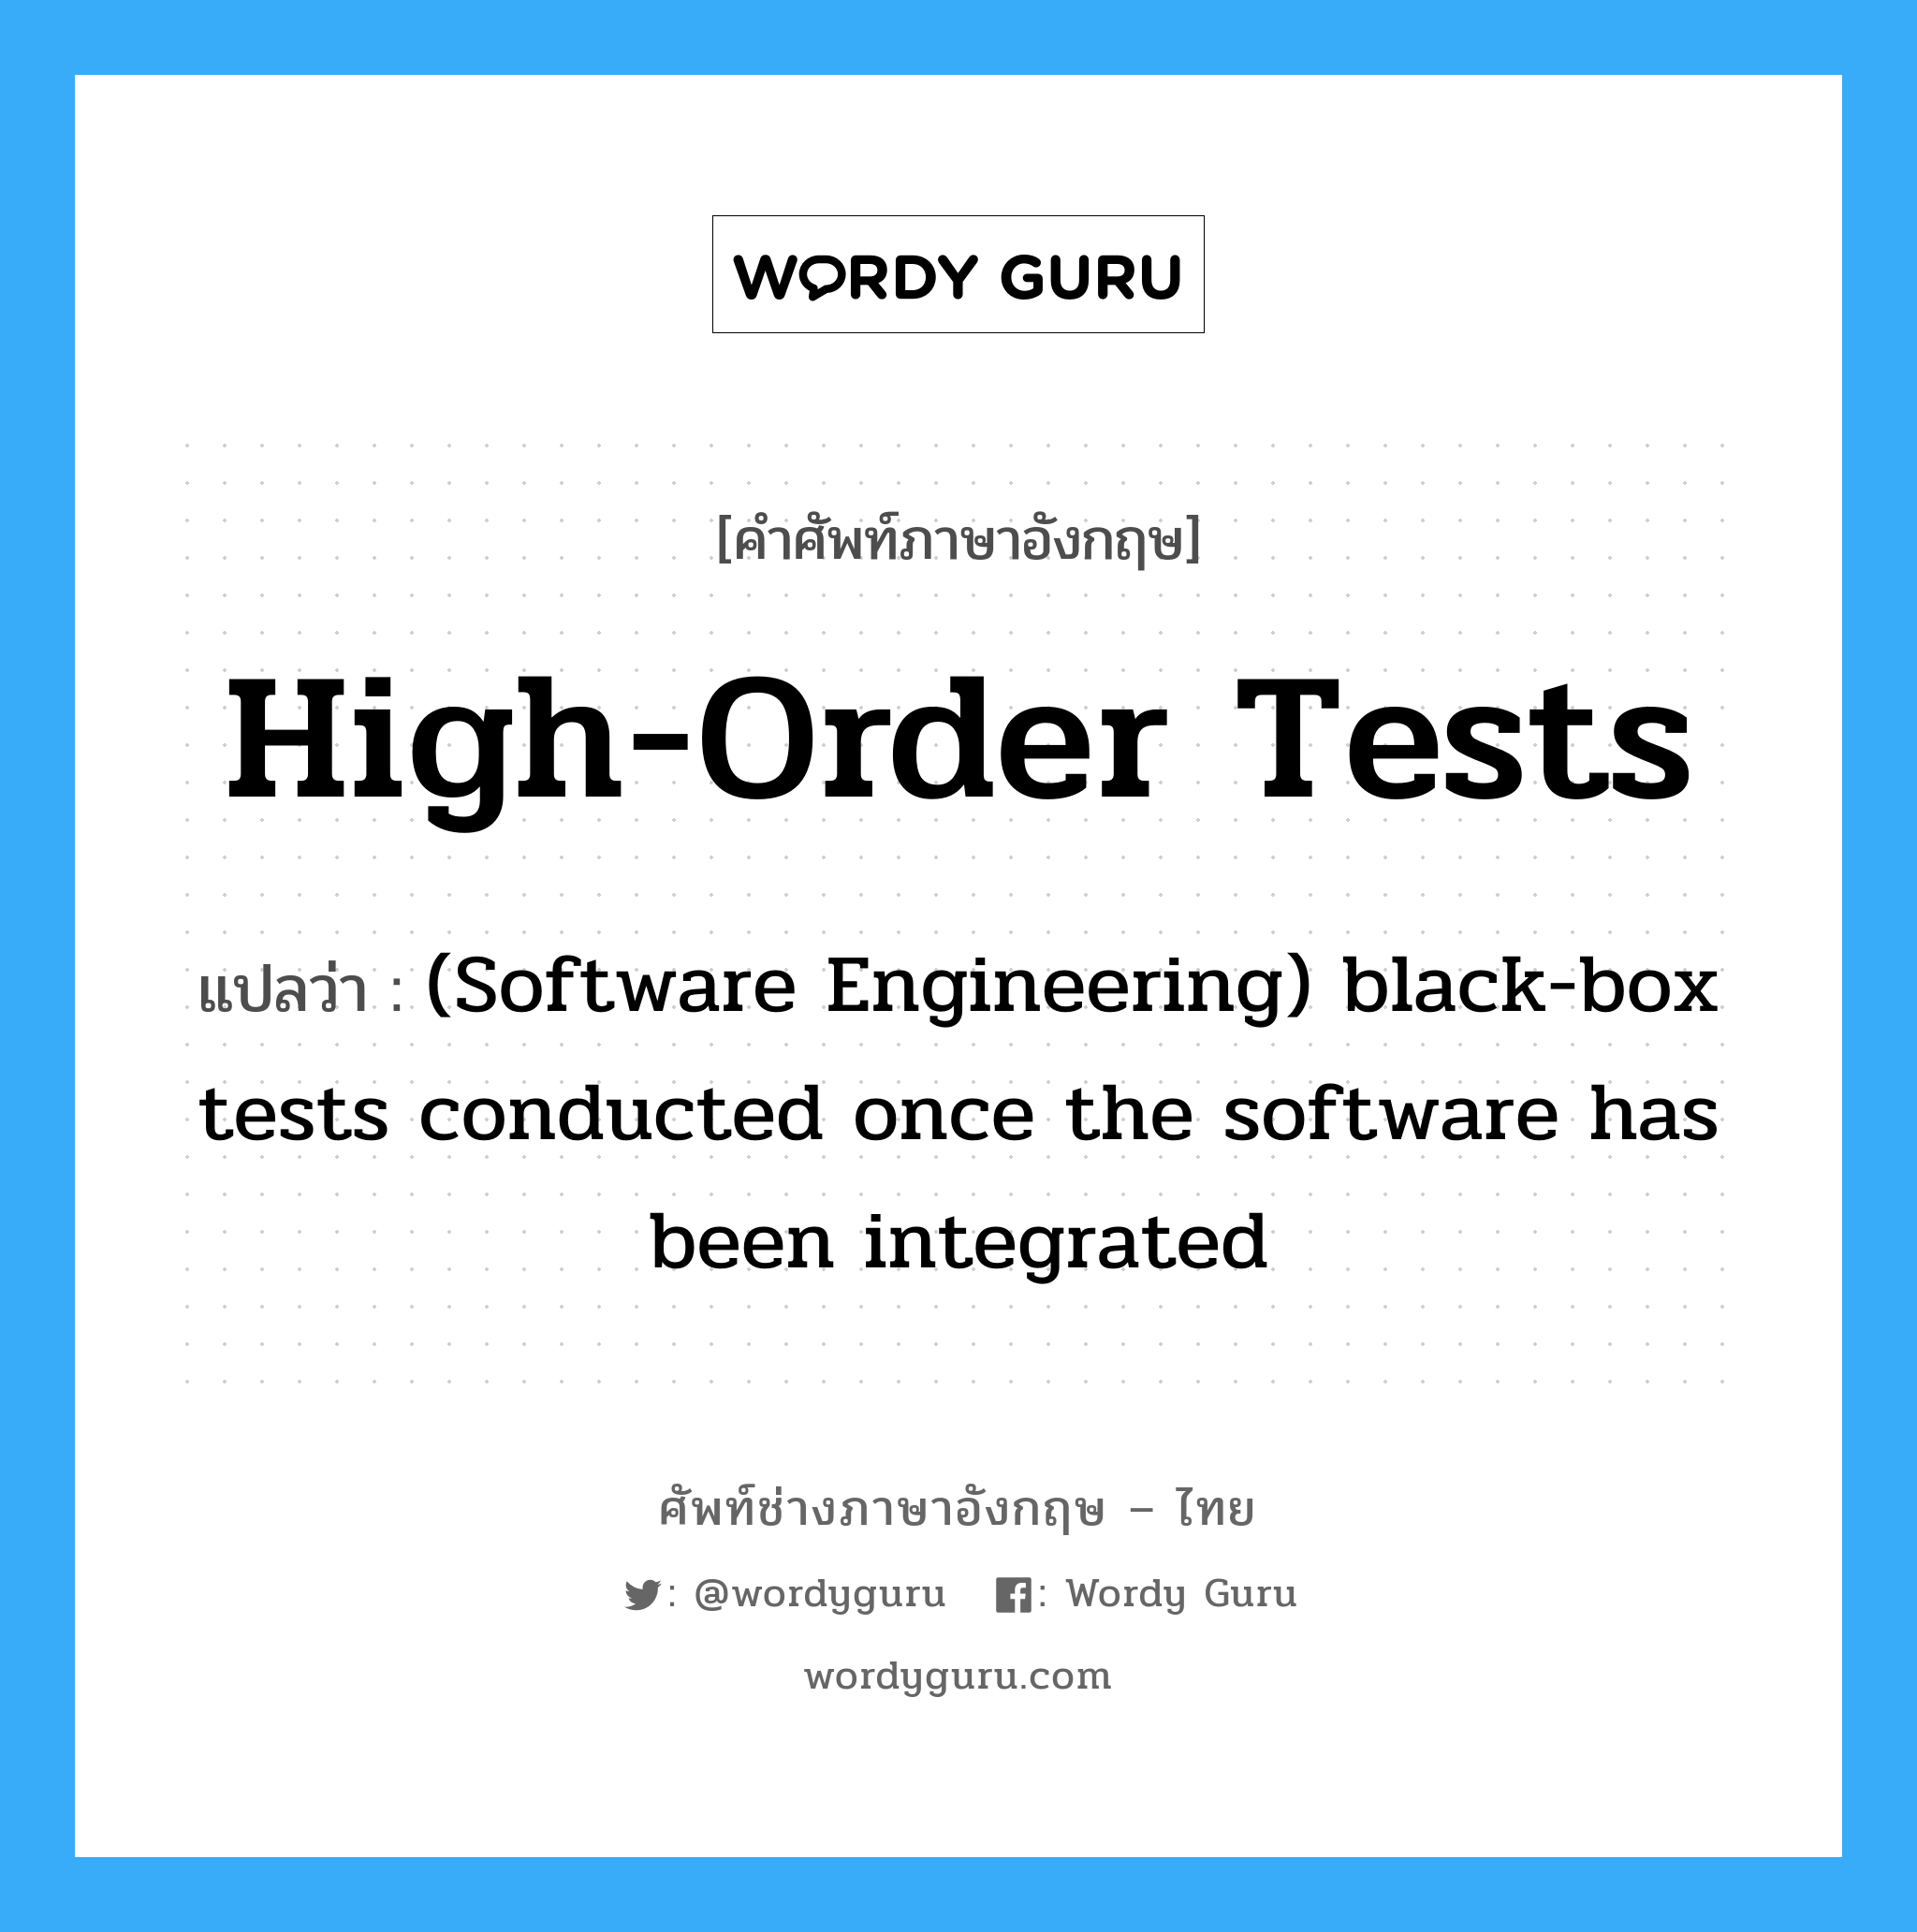 High-order tests แปลว่า?, คำศัพท์ช่างภาษาอังกฤษ - ไทย High-order tests คำศัพท์ภาษาอังกฤษ High-order tests แปลว่า (Software Engineering) black-box tests conducted once the software has been integrated